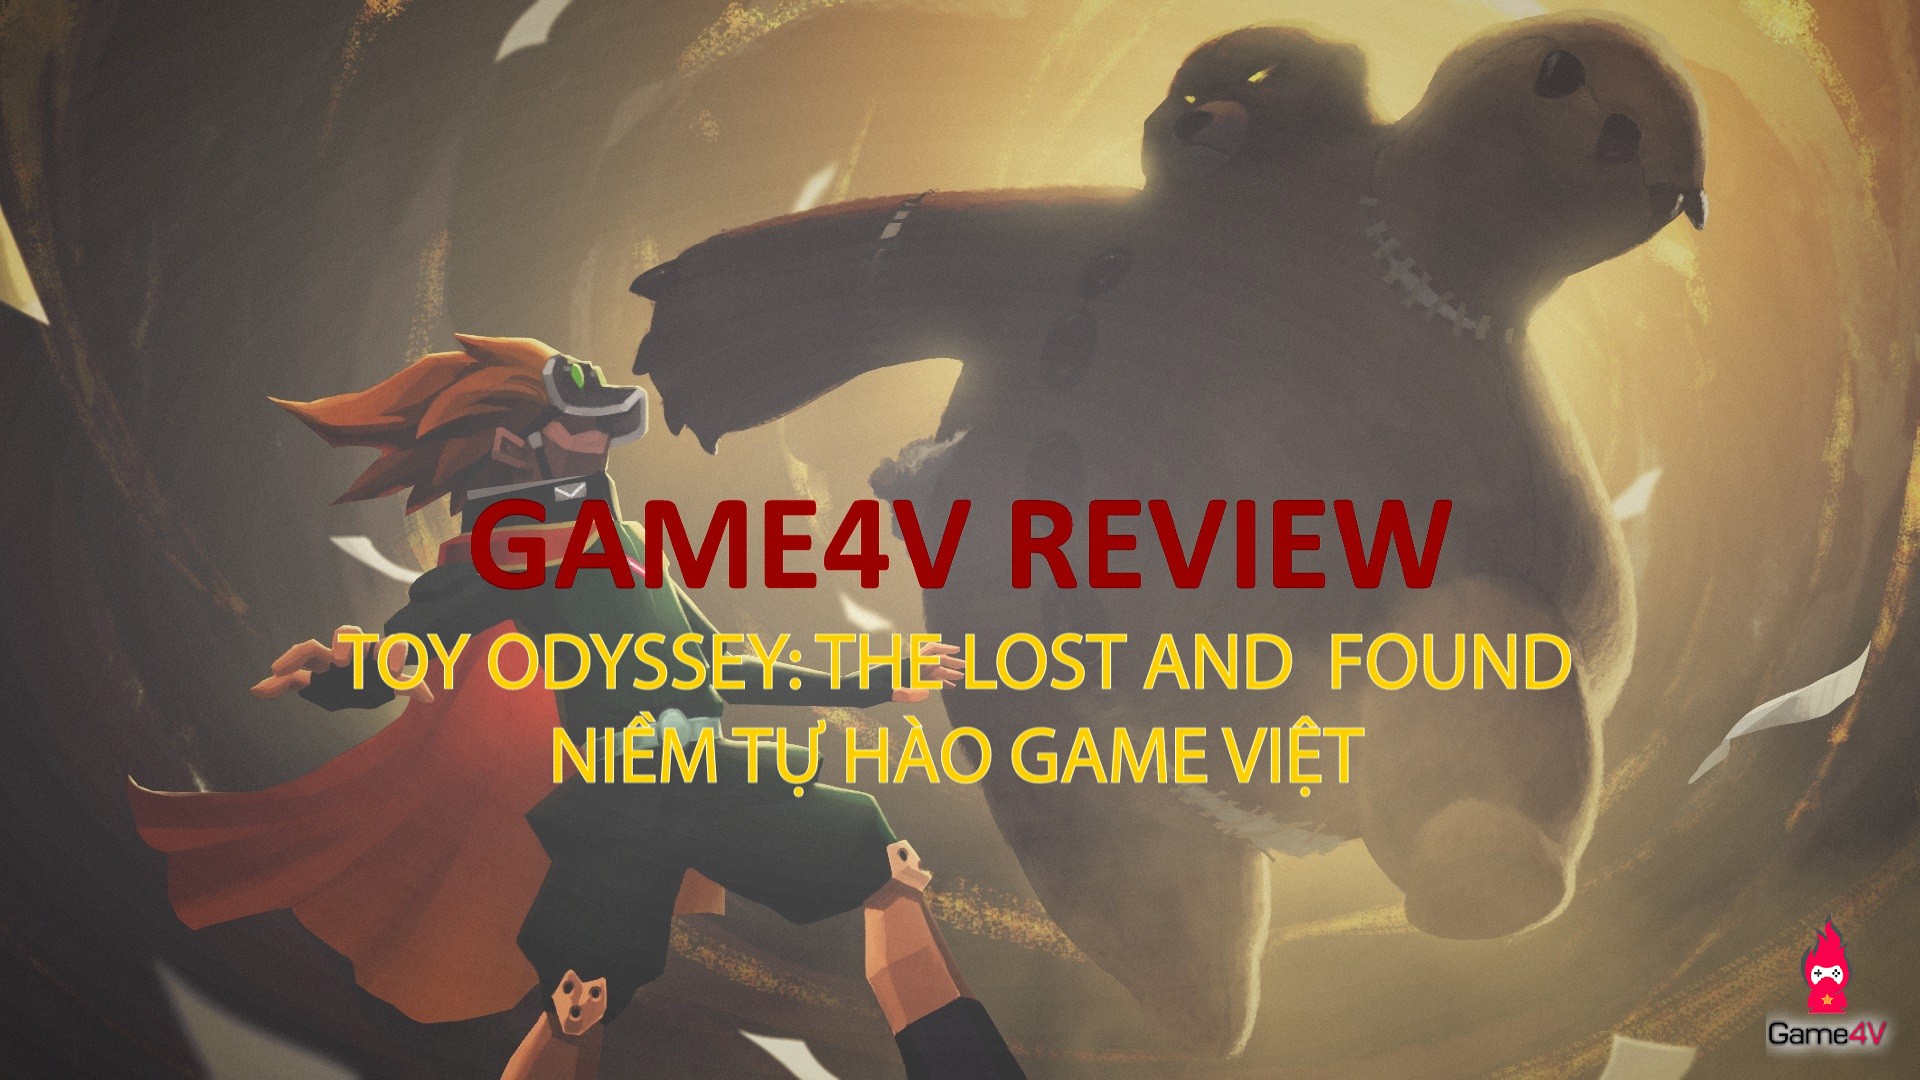 [Trải nghiệm] Toy Odyssey: The Lost and Found - Niềm tự hào game Việt